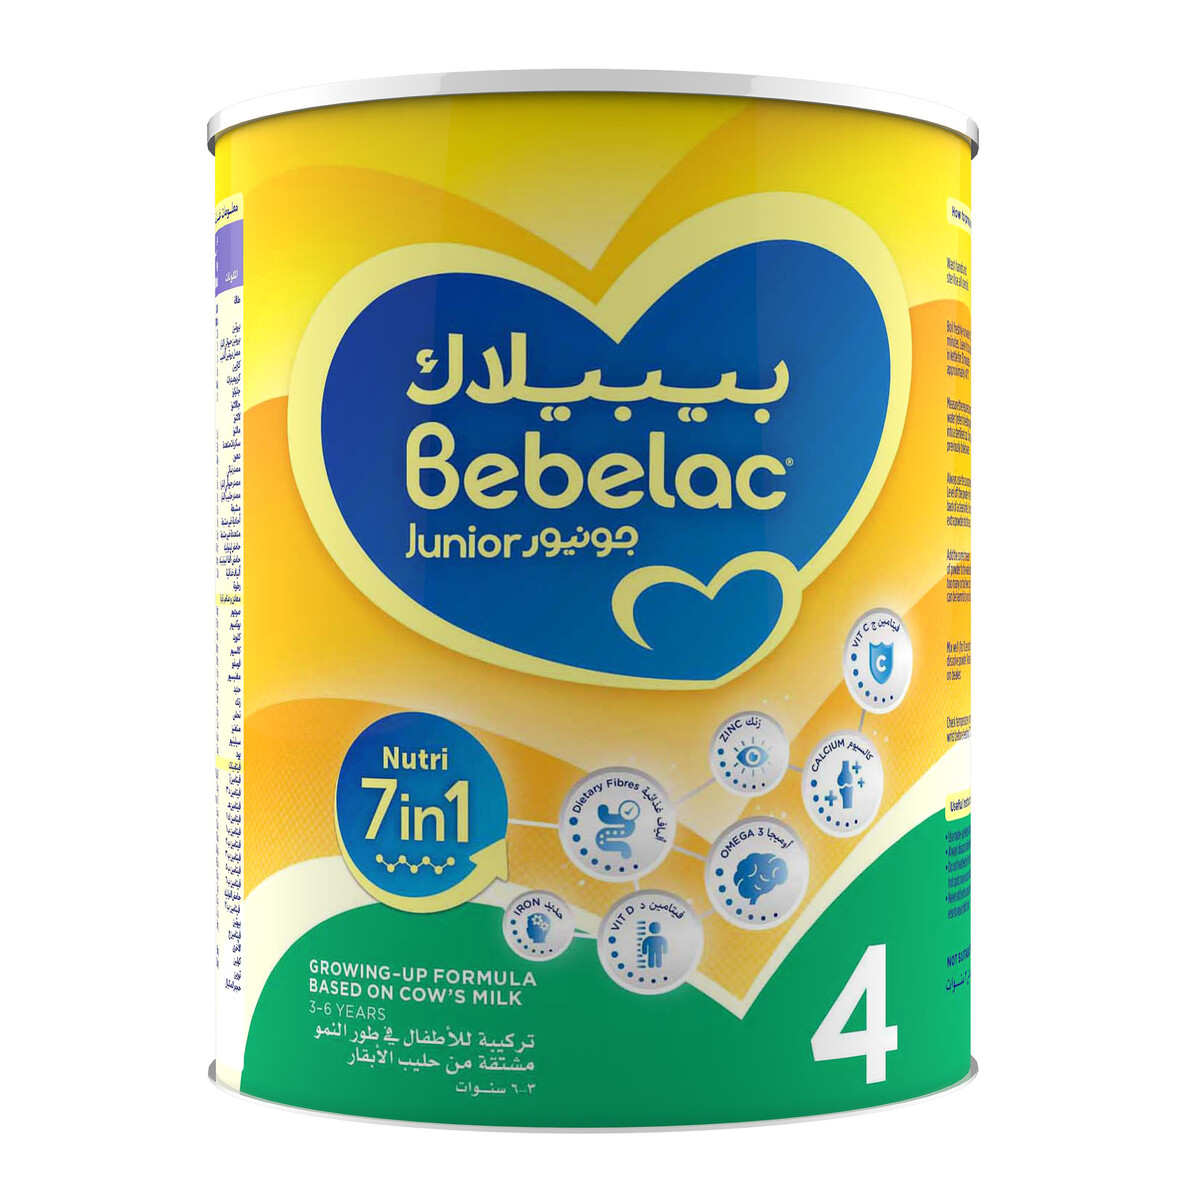 Bebelac Junior Nutri 7in1 Growing Up Formula Stage 4 From 3 to 6 Years 800 g